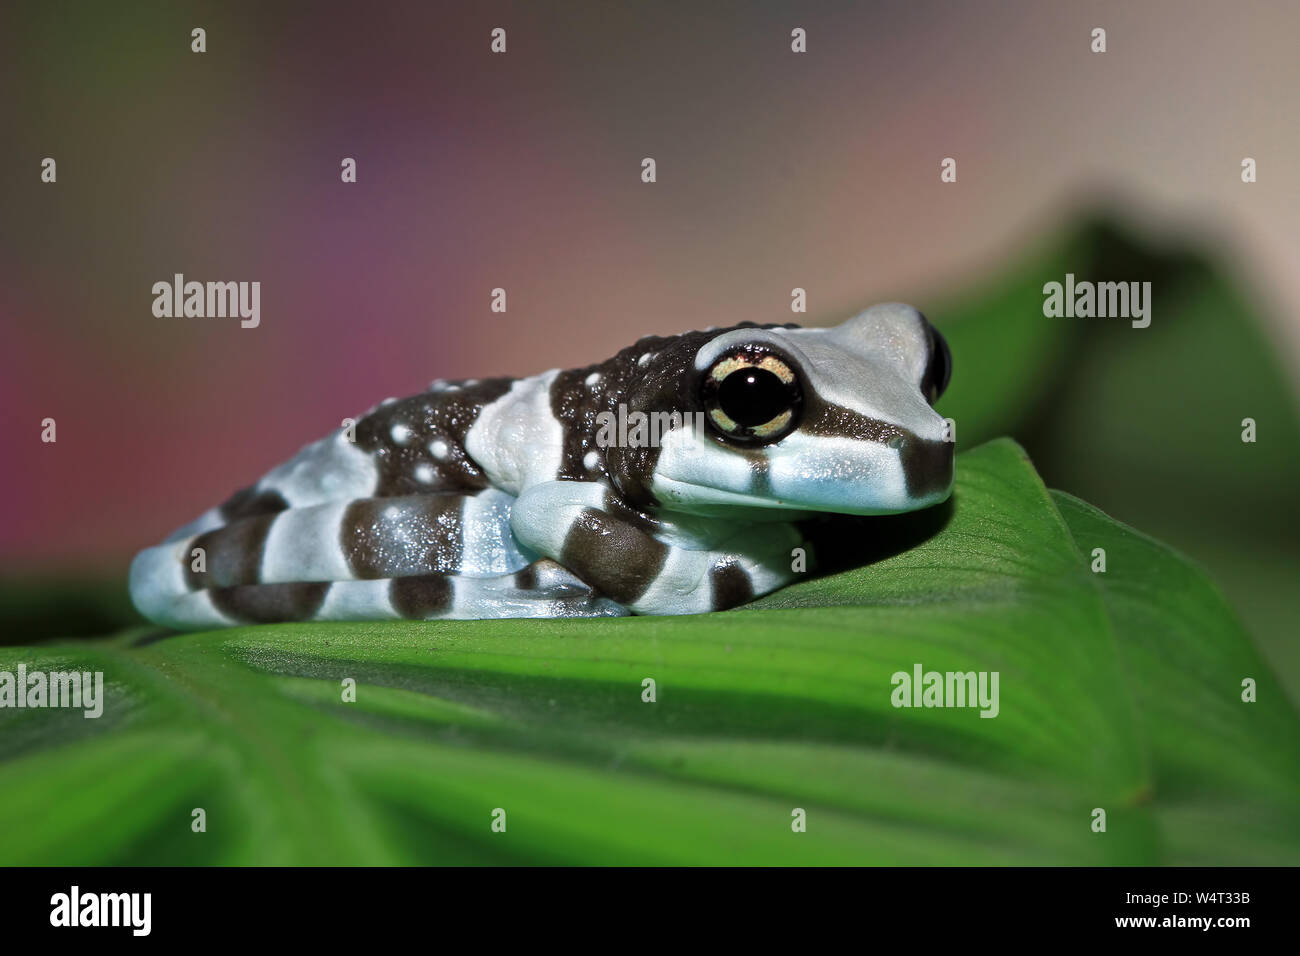 Milk Frog High Resolution Stock Photography and Images - Alamy